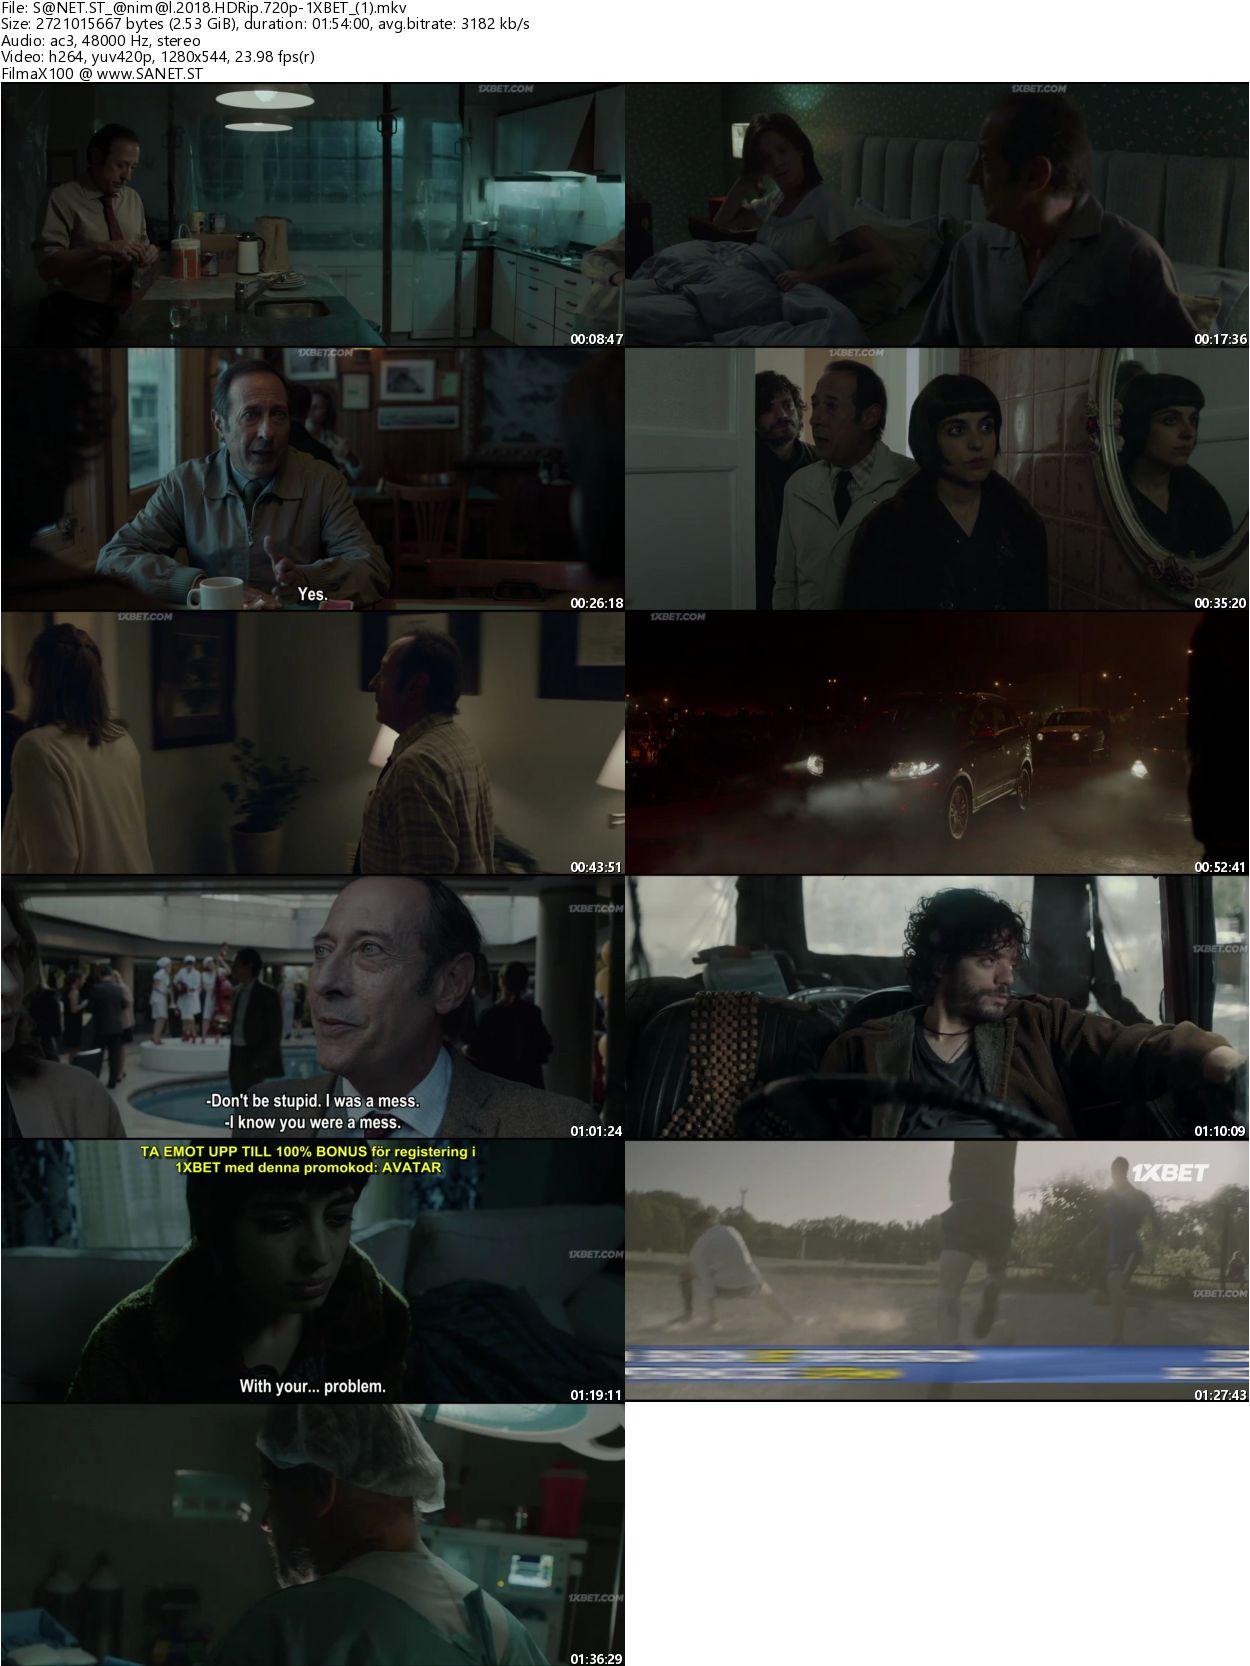 Download Animal 2018 HDRip 720p x264-1XBET - SoftArchive